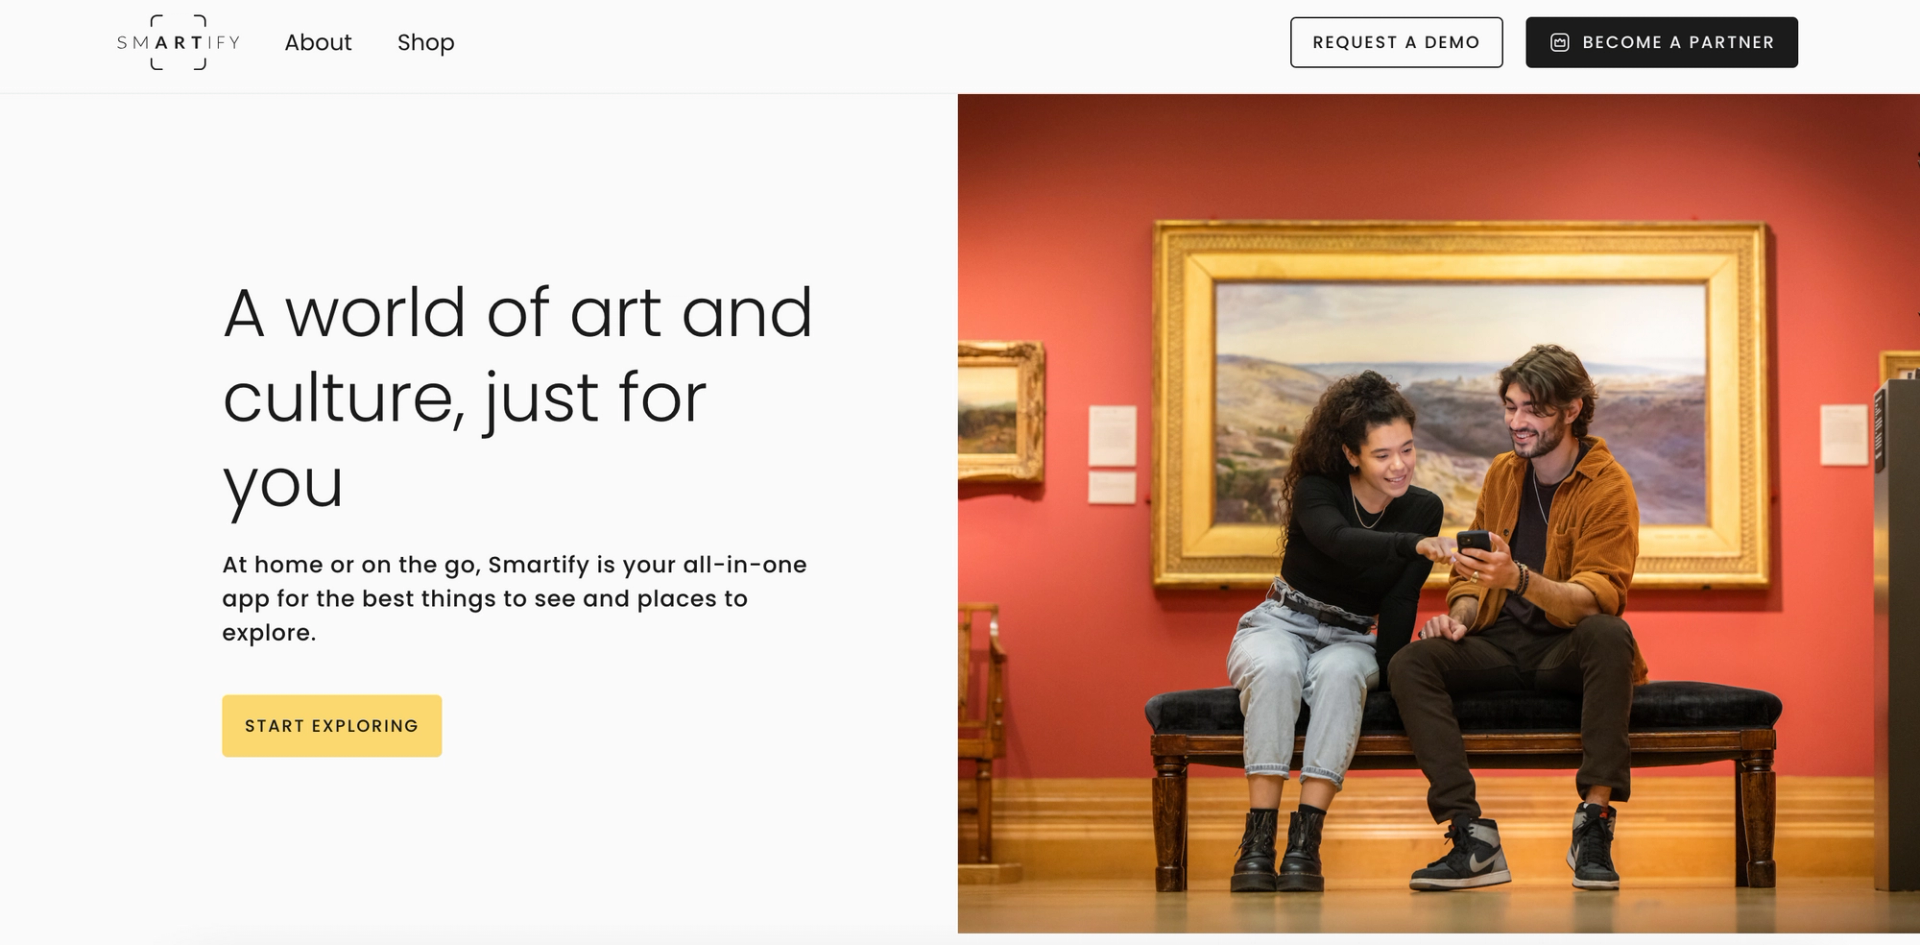 A screenshot of the landing page for the platform Smartify. To the right, a couple is shown at a museum and, to the left, the slogan "A world of art and culture, just for you"